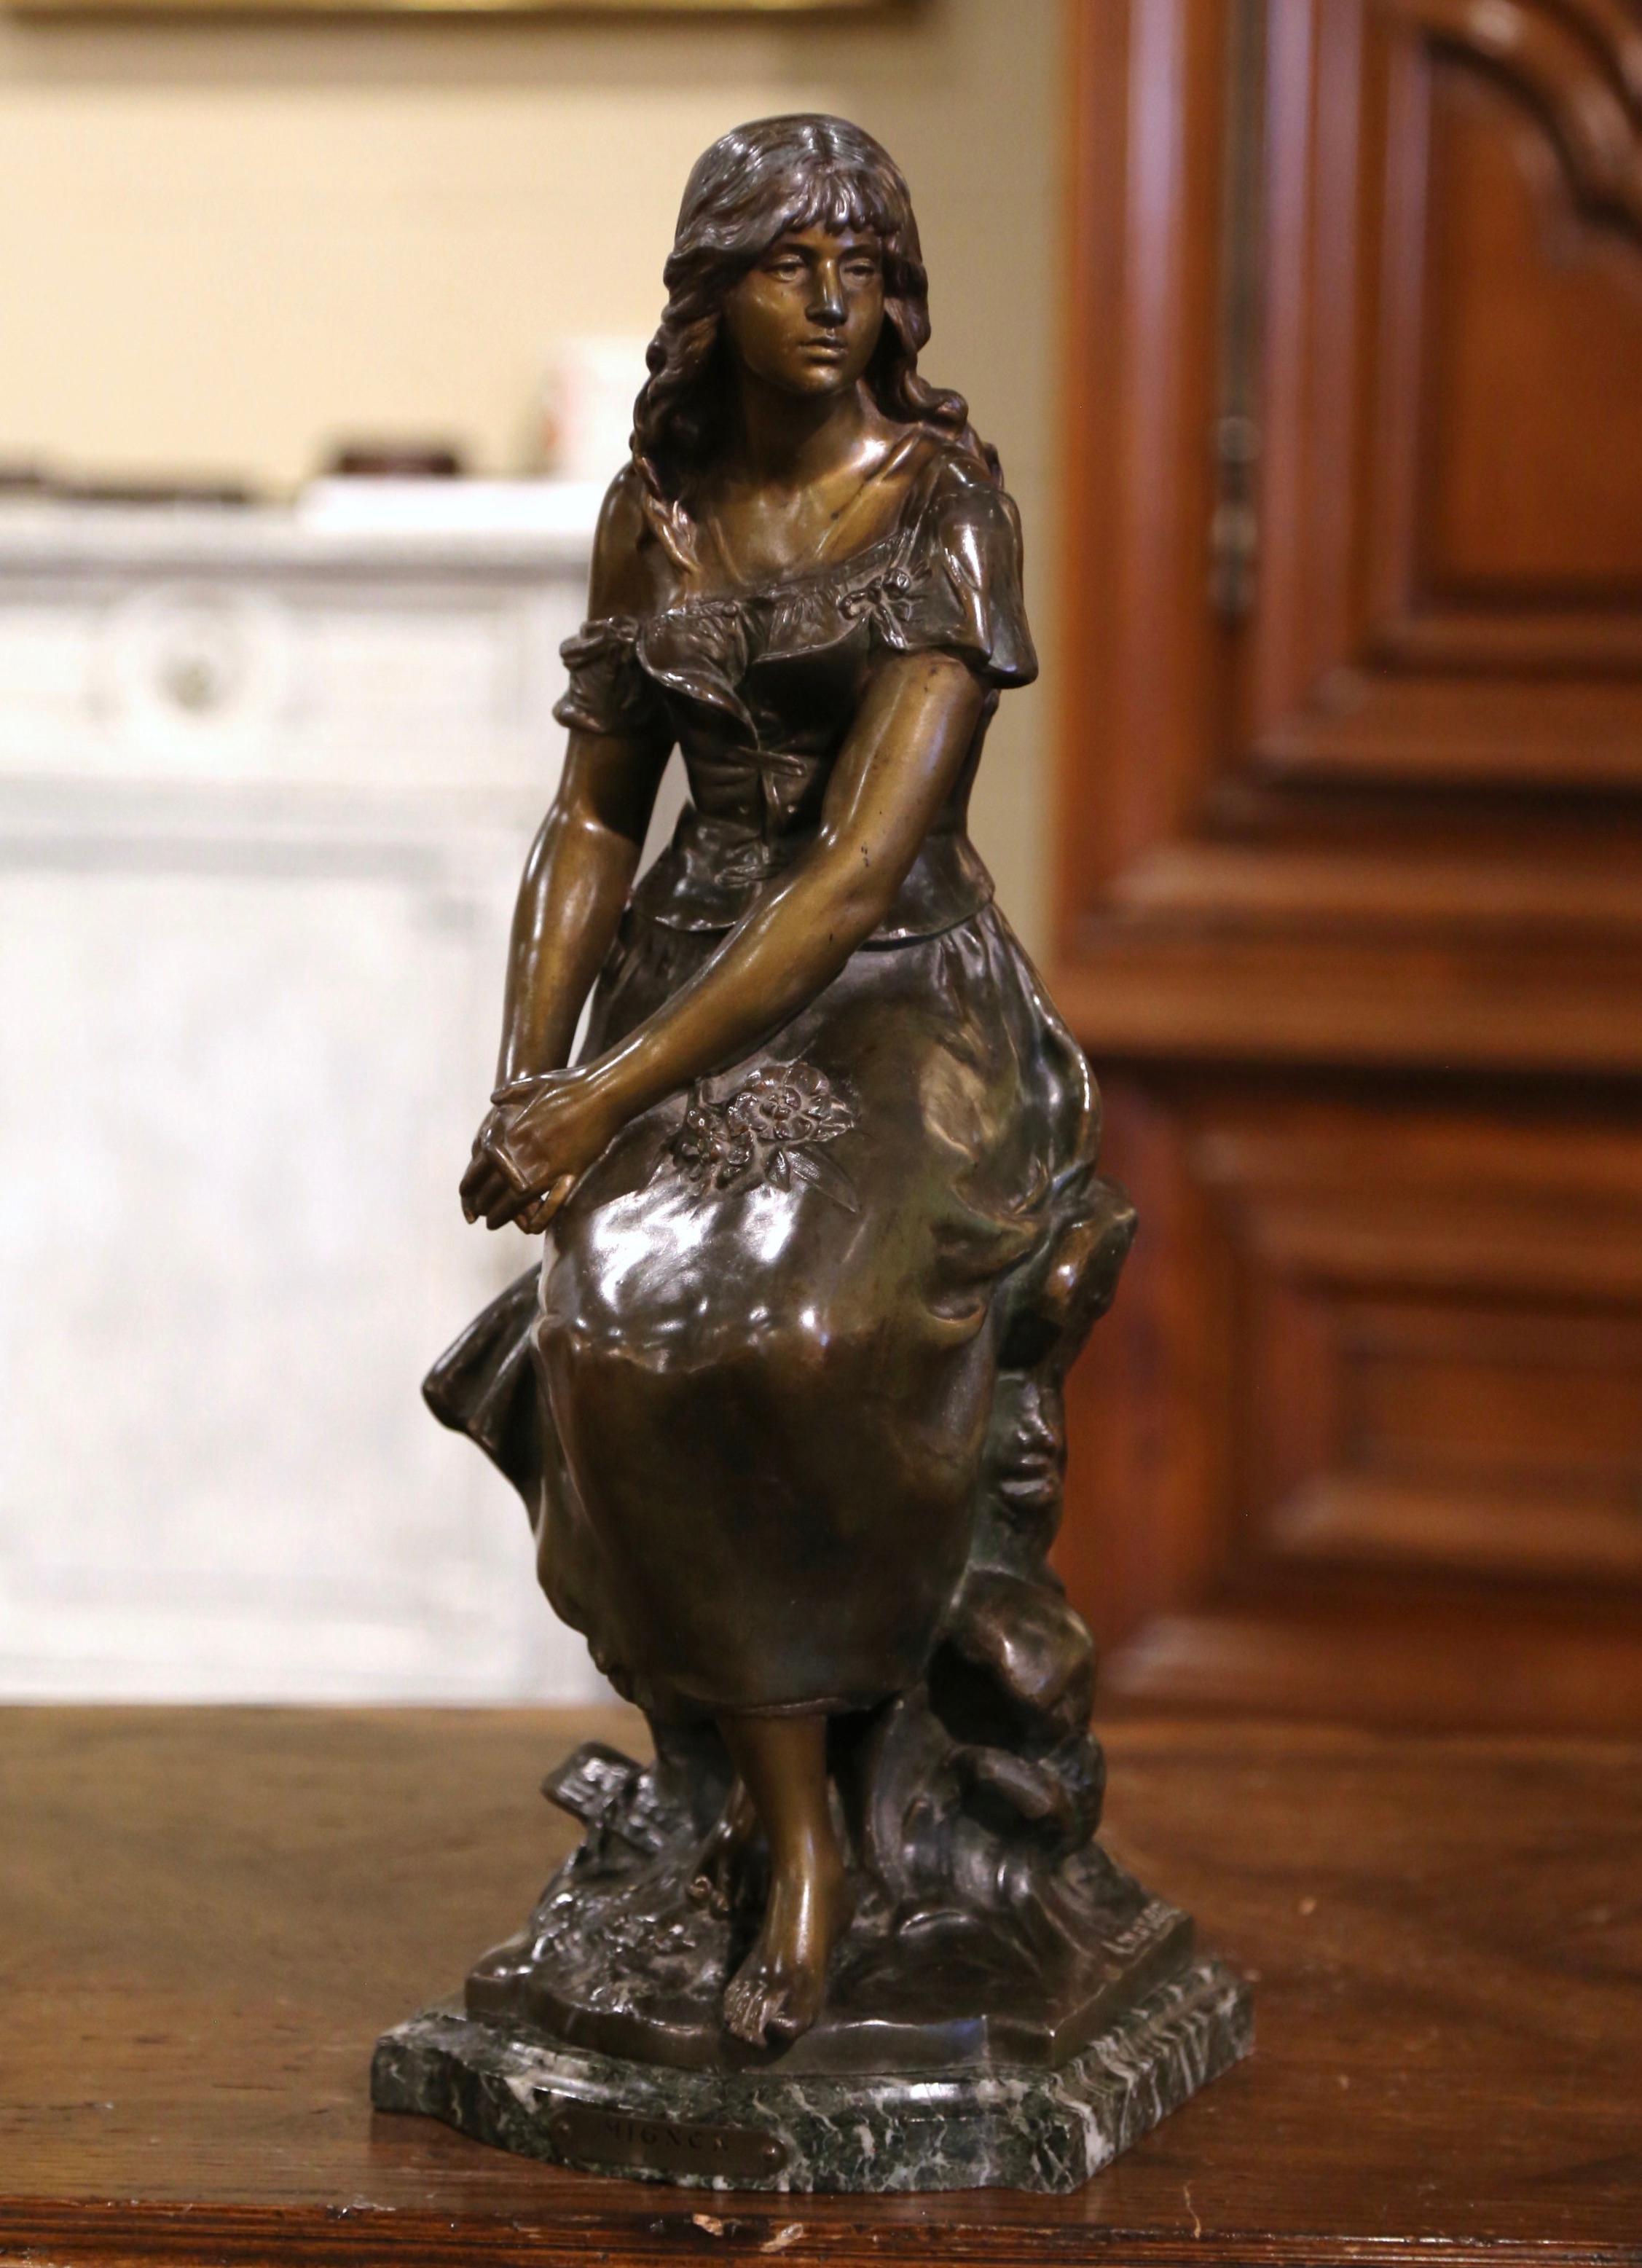 This elegant figure composition was crafted in France circa 1880. Built of spelter, the statue stands on a shaped black and grey marble base, and depicts a young female beauty seated on a trunk, her hands crossed on her thighs. The tall composition